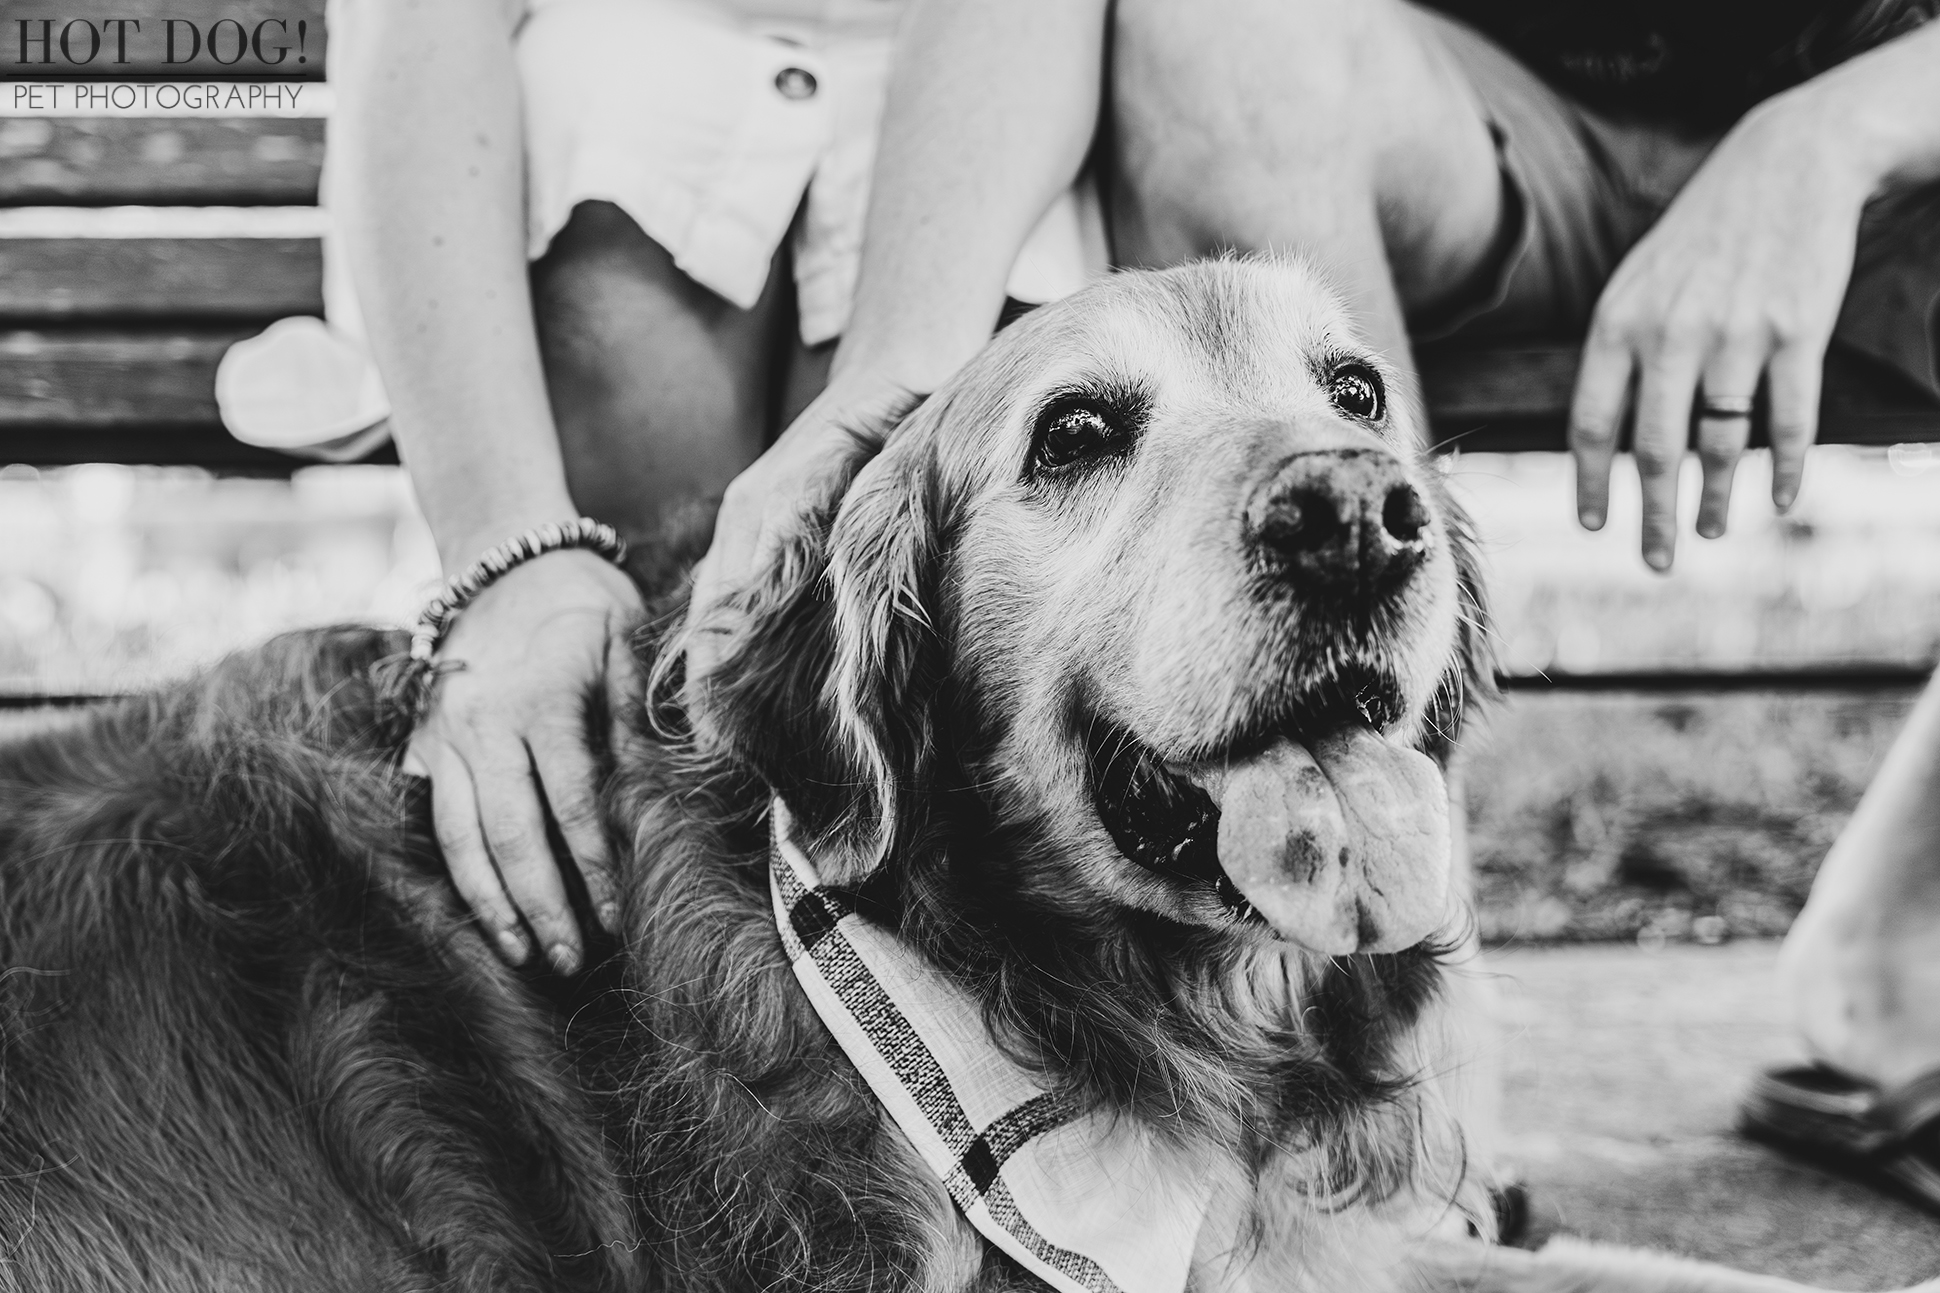 Tails of Celebration: With wagging tails and eyes full of love, senior golden retriever Osho and his family weave a heartwarming story in the heart of Celebration, Florida. (Photo by Hot Dog! Pet Photography)